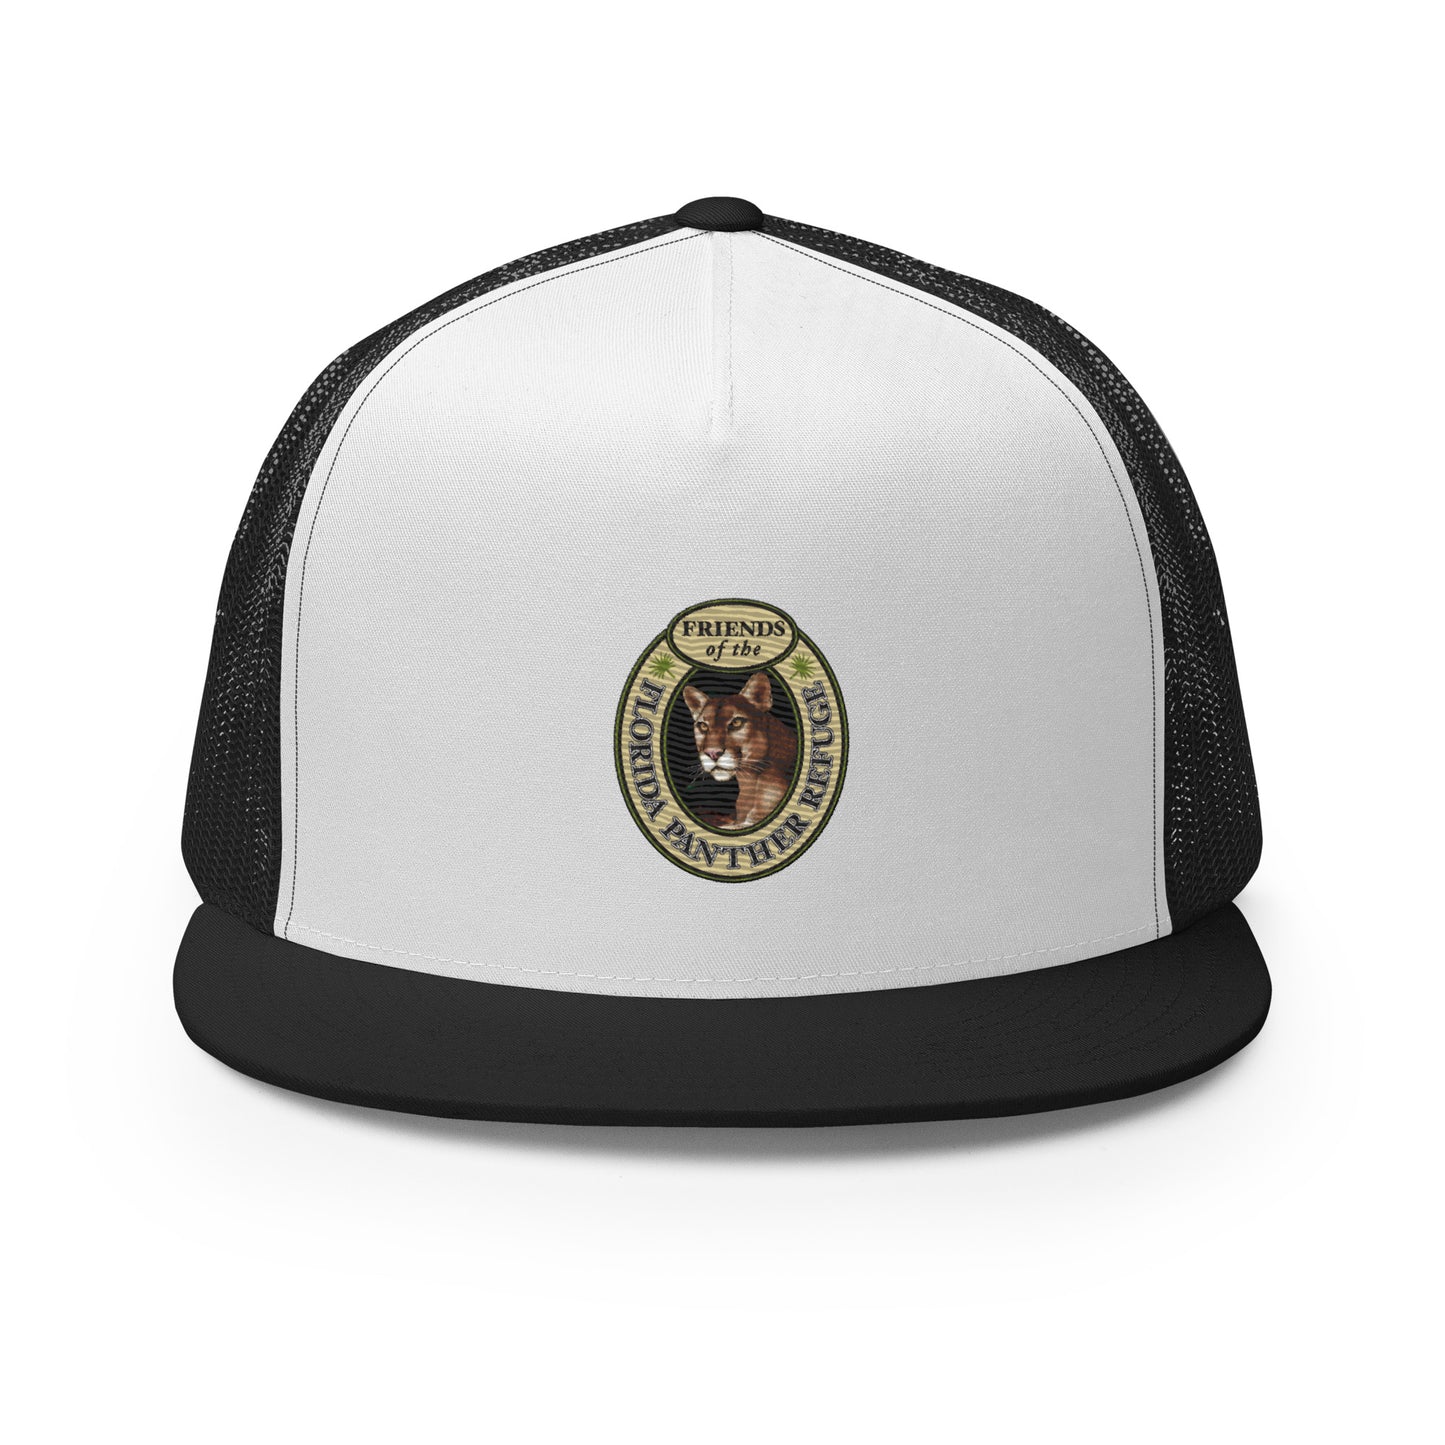 Friends of the Panther Refuge Trucker Cap